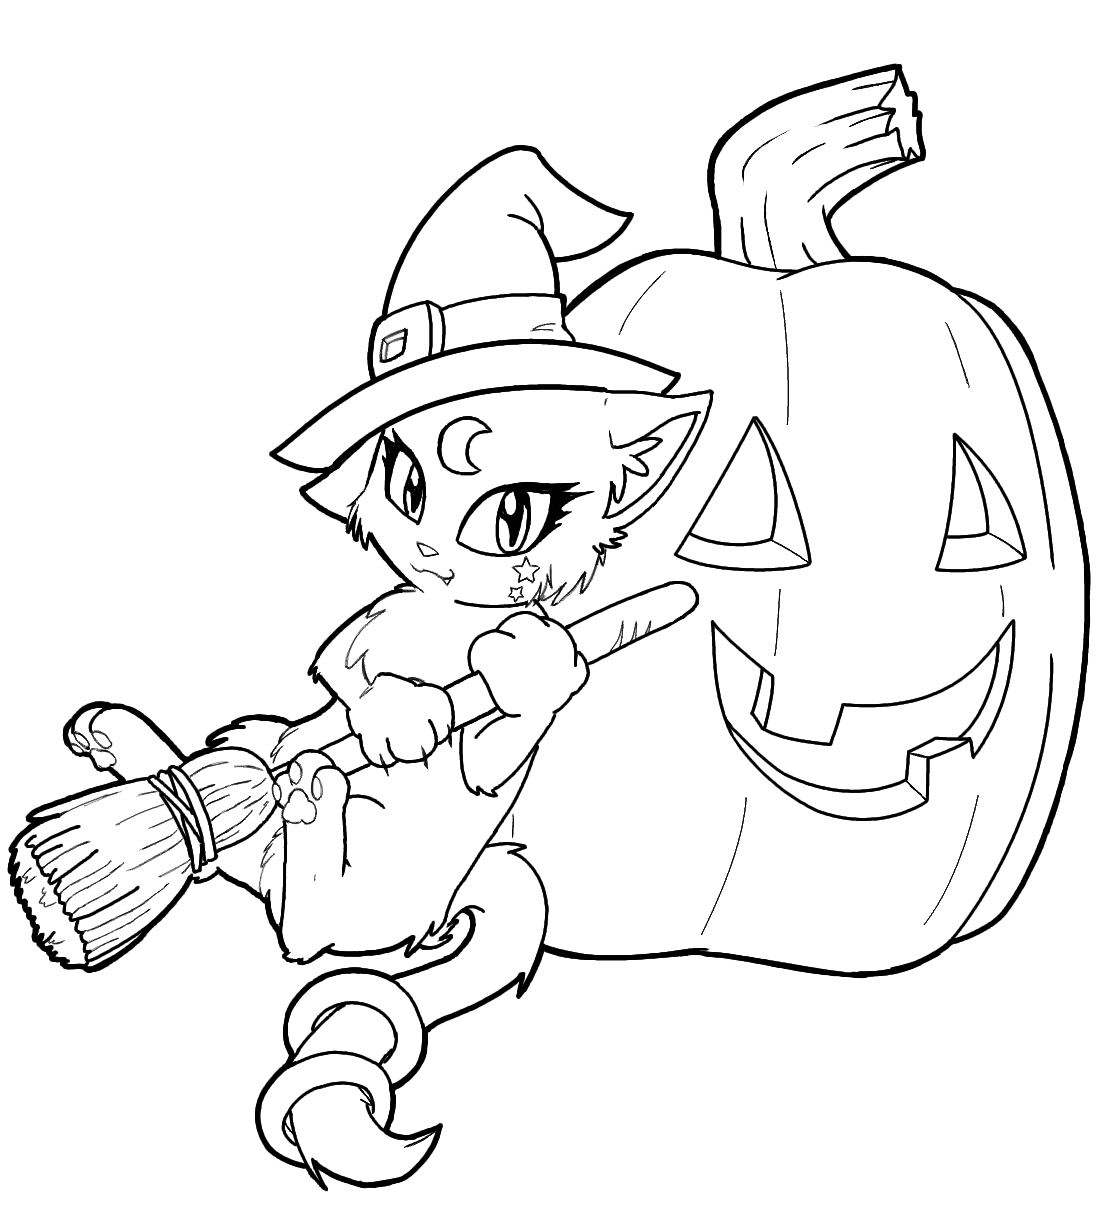 Witch Kitty Coloring Page by xNocturnalKittenX on DeviantArt